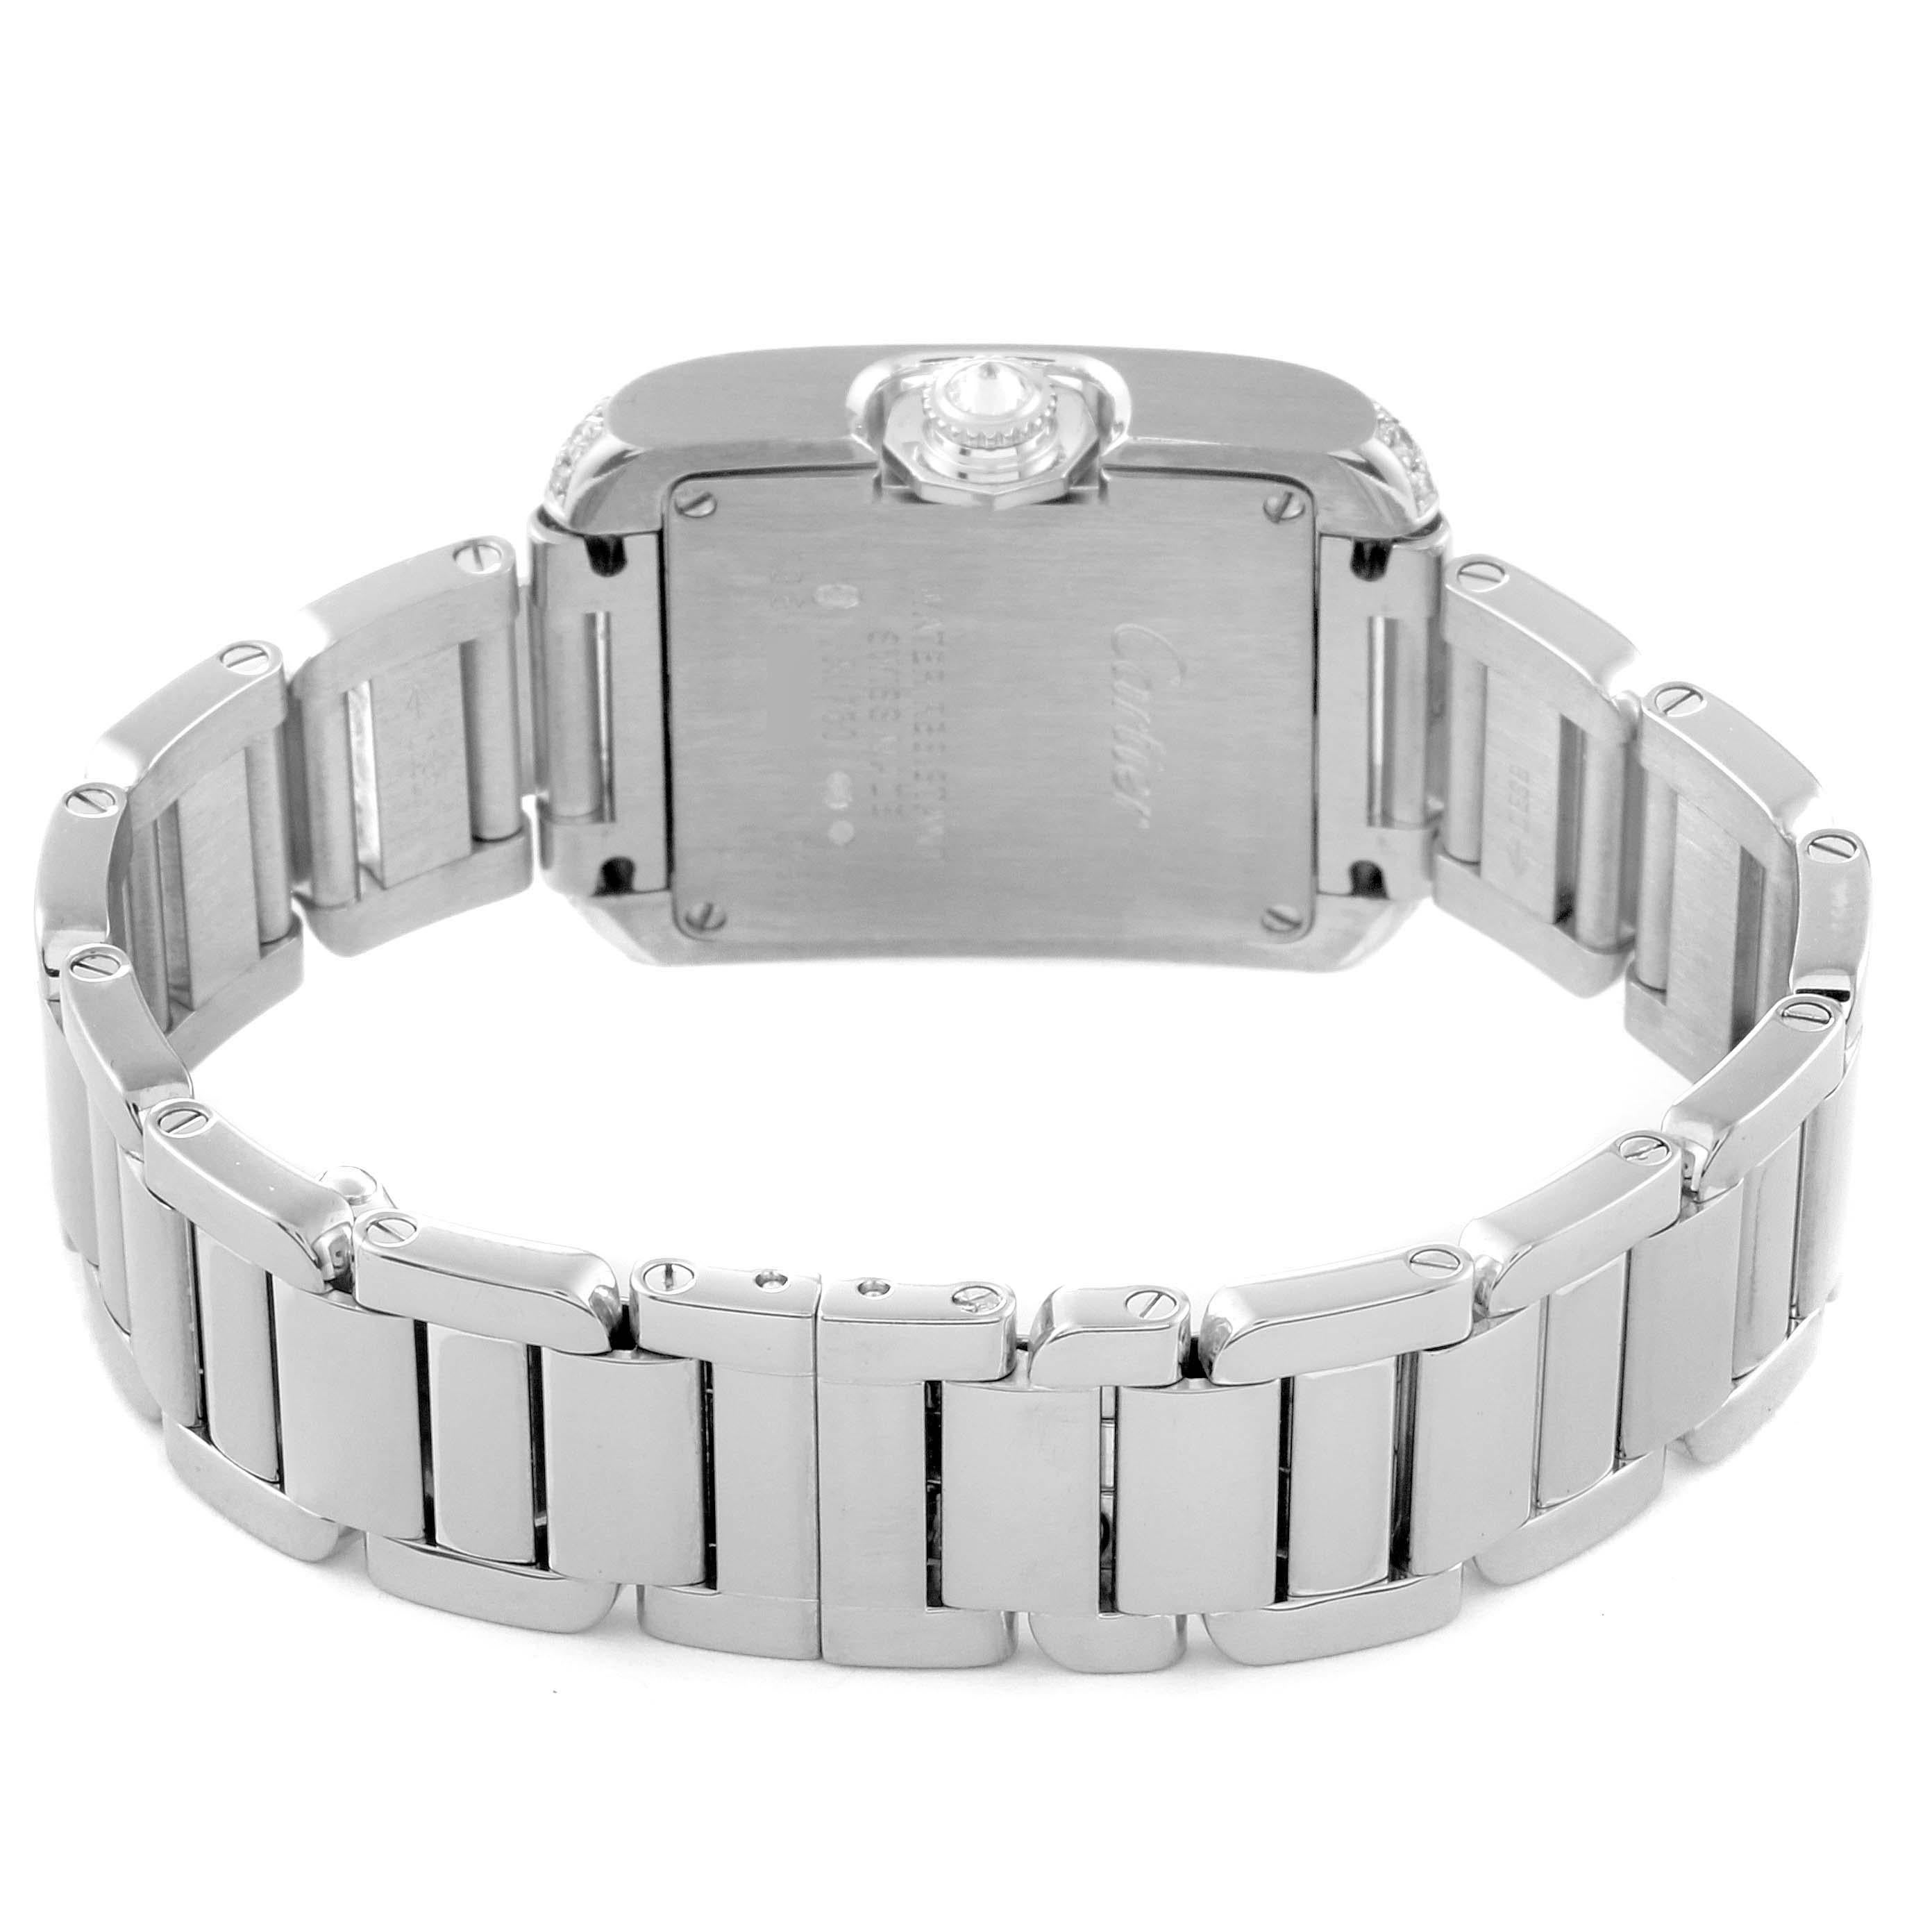 Cartier Tank Anglaise White Gold Diamond Ladies Watch WT100008 For Sale 4